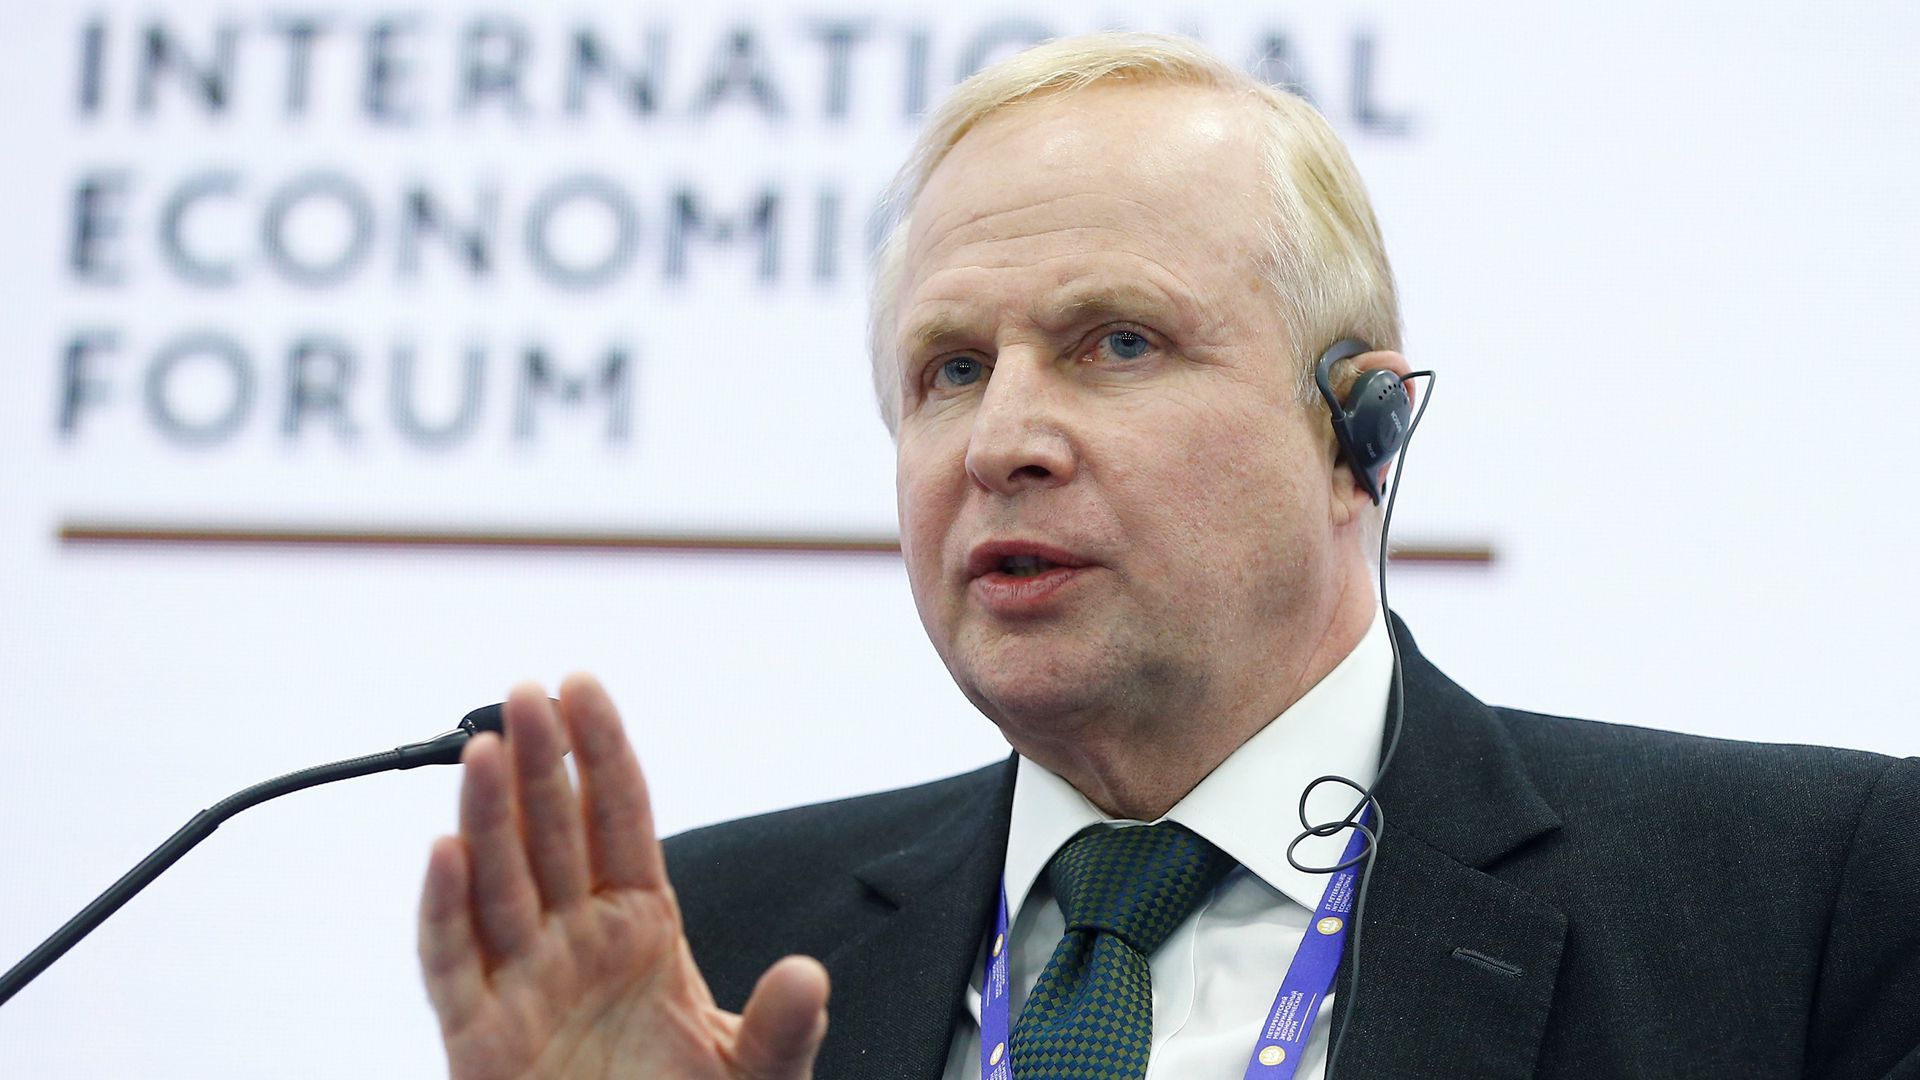 BP CEO Bob Dudley speaking at a podium 